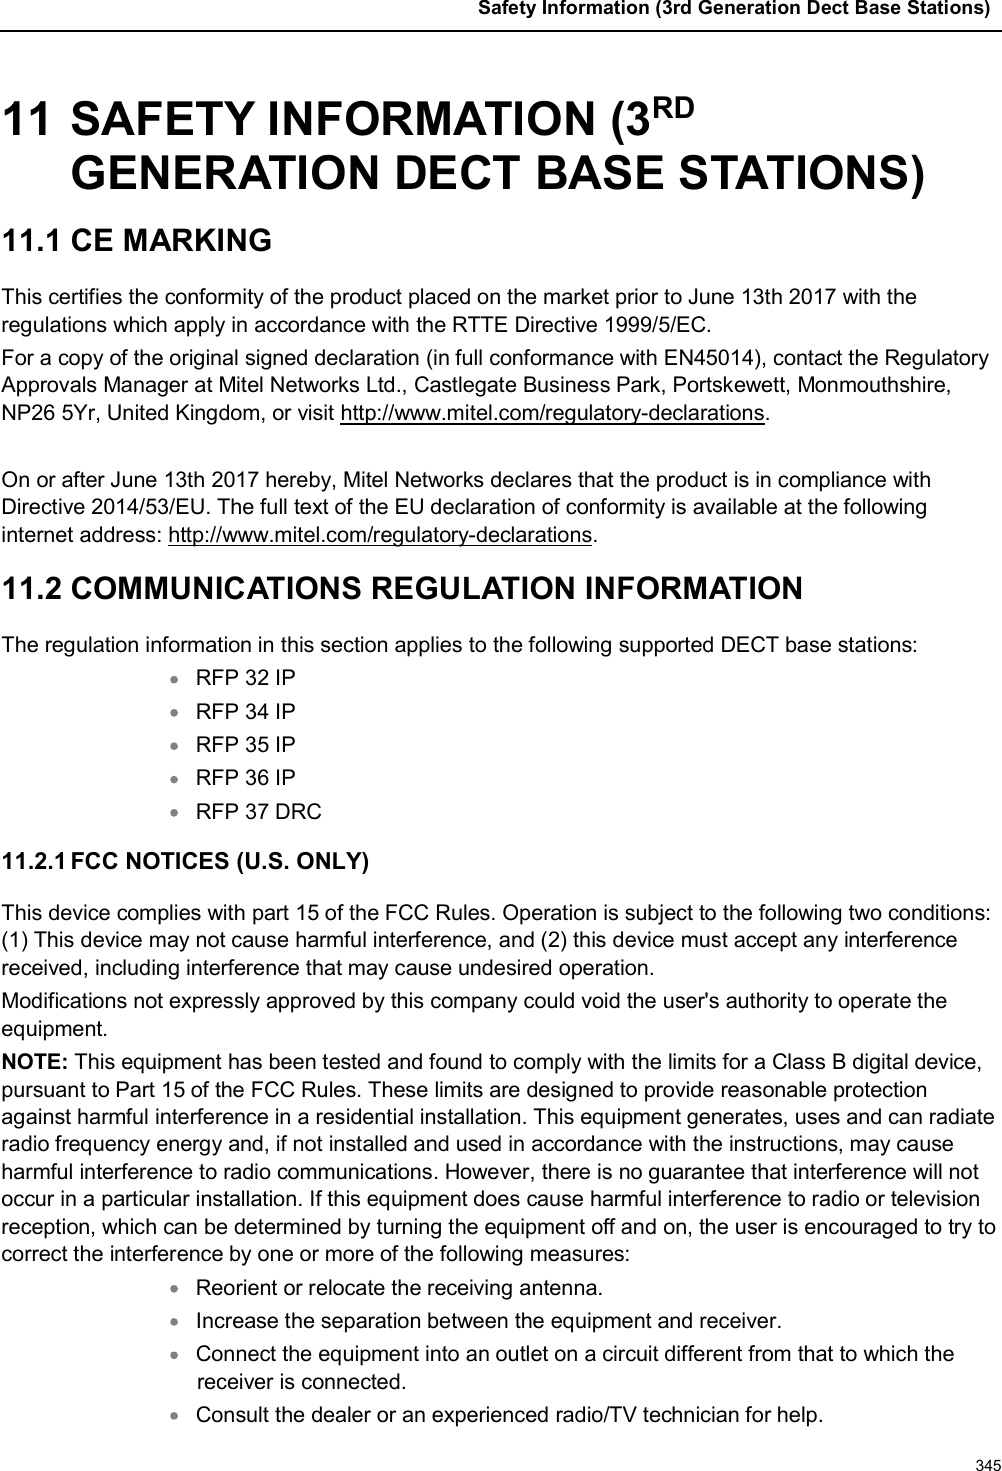 Safety Information (3rd Generation Dect Base Stations)34511 SAFETY INFORMATION (3RDGENERATION DECT BASE STATIONS)11.1 CE MARKING This certifies the conformity of the product placed on the market prior to June 13th 2017 with the regulations which apply in accordance with the RTTE Directive 1999/5/EC. For a copy of the original signed declaration (in full conformance with EN45014), contact the Regulatory Approvals Manager at Mitel Networks Ltd., Castlegate Business Park, Portskewett, Monmouthshire, NP26 5Yr, United Kingdom, or visit http://www.mitel.com/regulatory-declarations.On or after June 13th 2017 hereby, Mitel Networks declares that the product is in compliance with Directive 2014/53/EU. The full text of the EU declaration of conformity is available at the following internet address: http://www.mitel.com/regulatory-declarations.11.2 COMMUNICATIONS REGULATION INFORMATIONThe regulation information in this section applies to the following supported DECT base stations:RFP 32 IPRFP 34 IPRFP 35 IPRFP 36 IPRFP 37 DRC11.2.1 FCC NOTICES (U.S. ONLY)This device complies with part 15 of the FCC Rules. Operation is subject to the following two conditions: (1) This device may not cause harmful interference, and (2) this device must accept any interference received, including interference that may cause undesired operation.Modifications not expressly approved by this company could void the user&apos;s authority to operate the equipment.NOTE: This equipment has been tested and found to comply with the limits for a Class B digital device, pursuant to Part 15 of the FCC Rules. These limits are designed to provide reasonable protection against harmful interference in a residential installation. This equipment generates, uses and can radiate radio frequency energy and, if not installed and used in accordance with the instructions, may causeharmful interference to radio communications. However, there is no guarantee that interference will not occur in a particular installation. If this equipment does cause harmful interference to radio or television reception, which can be determined by turning the equipment off and on, the user is encouraged to try to correct the interference by one or more of the following measures:Reorient or relocate the receiving antenna.Increase the separation between the equipment and receiver.Connect the equipment into an outlet on a circuit different from that to which the receiver is connected.Consult the dealer or an experienced radio/TV technician for help.